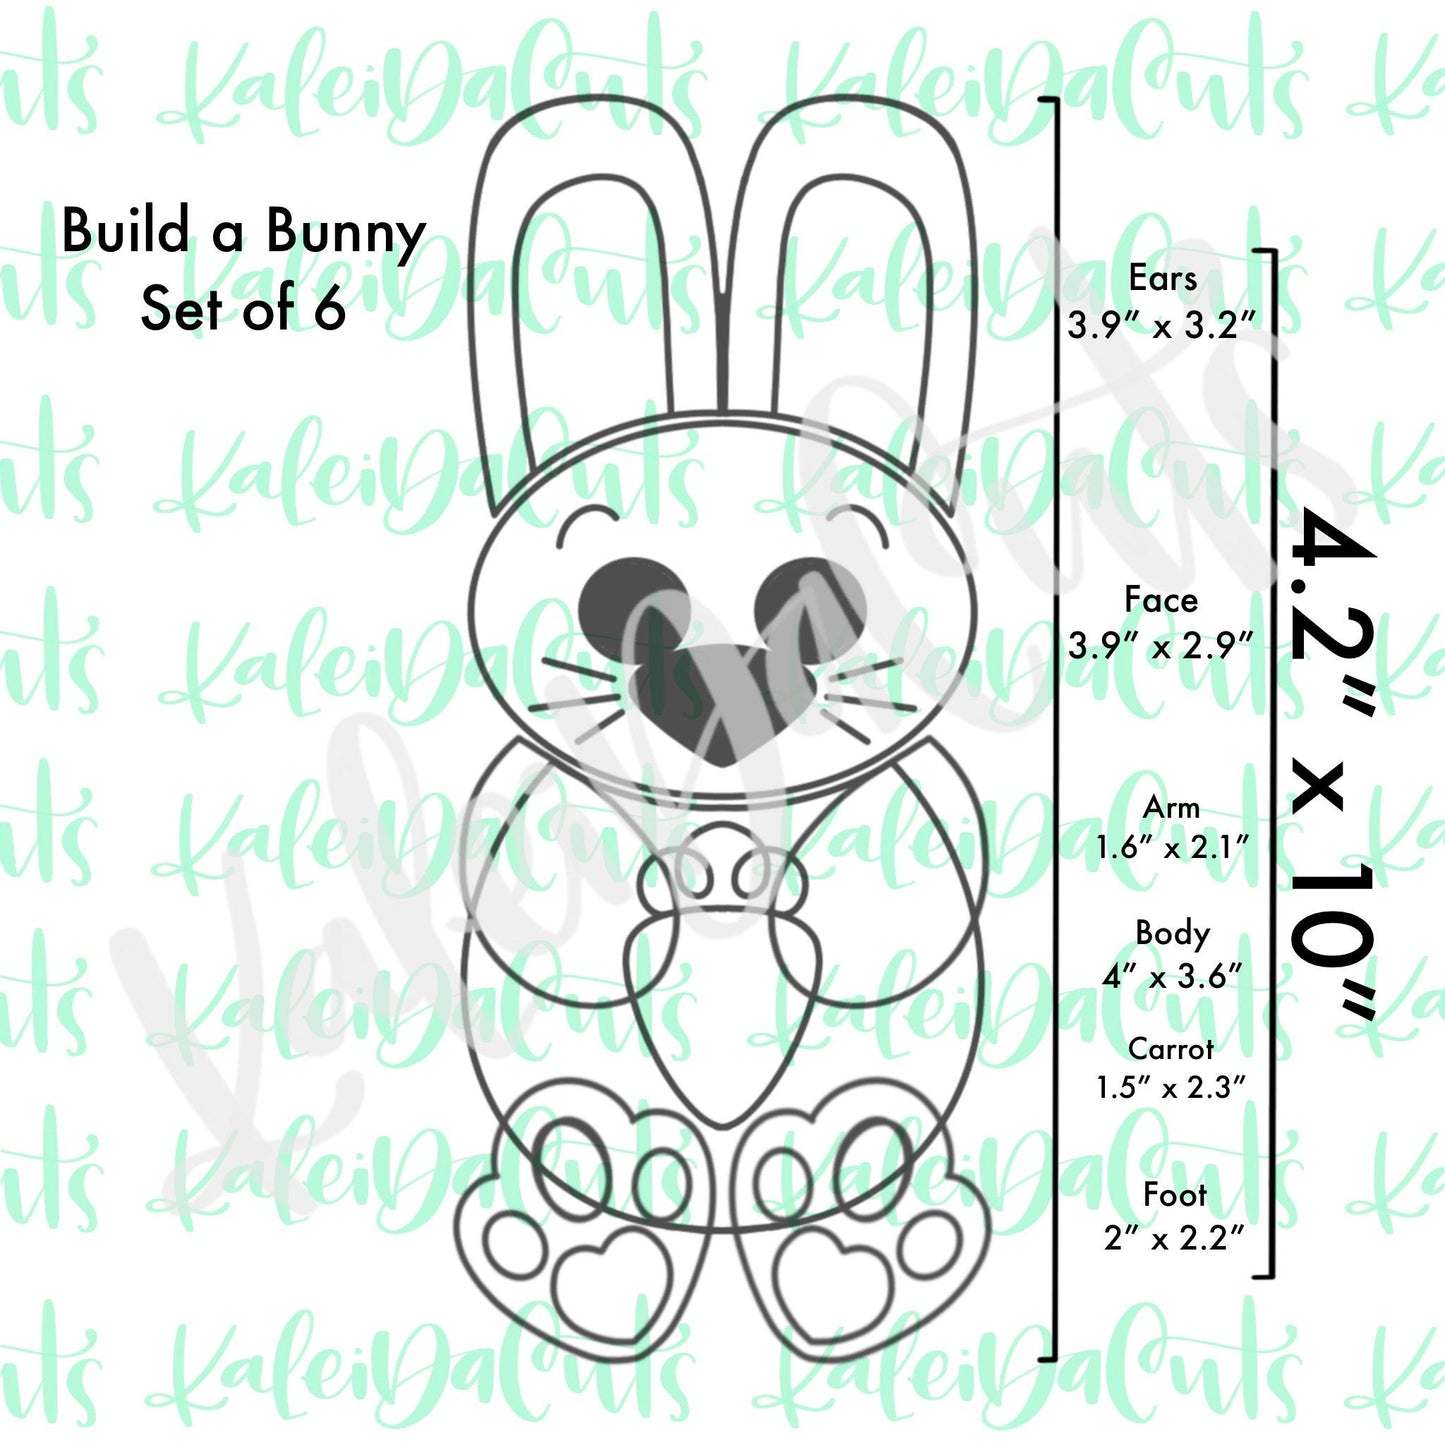 Build a Bunny Set of 6 Cookie Cutters